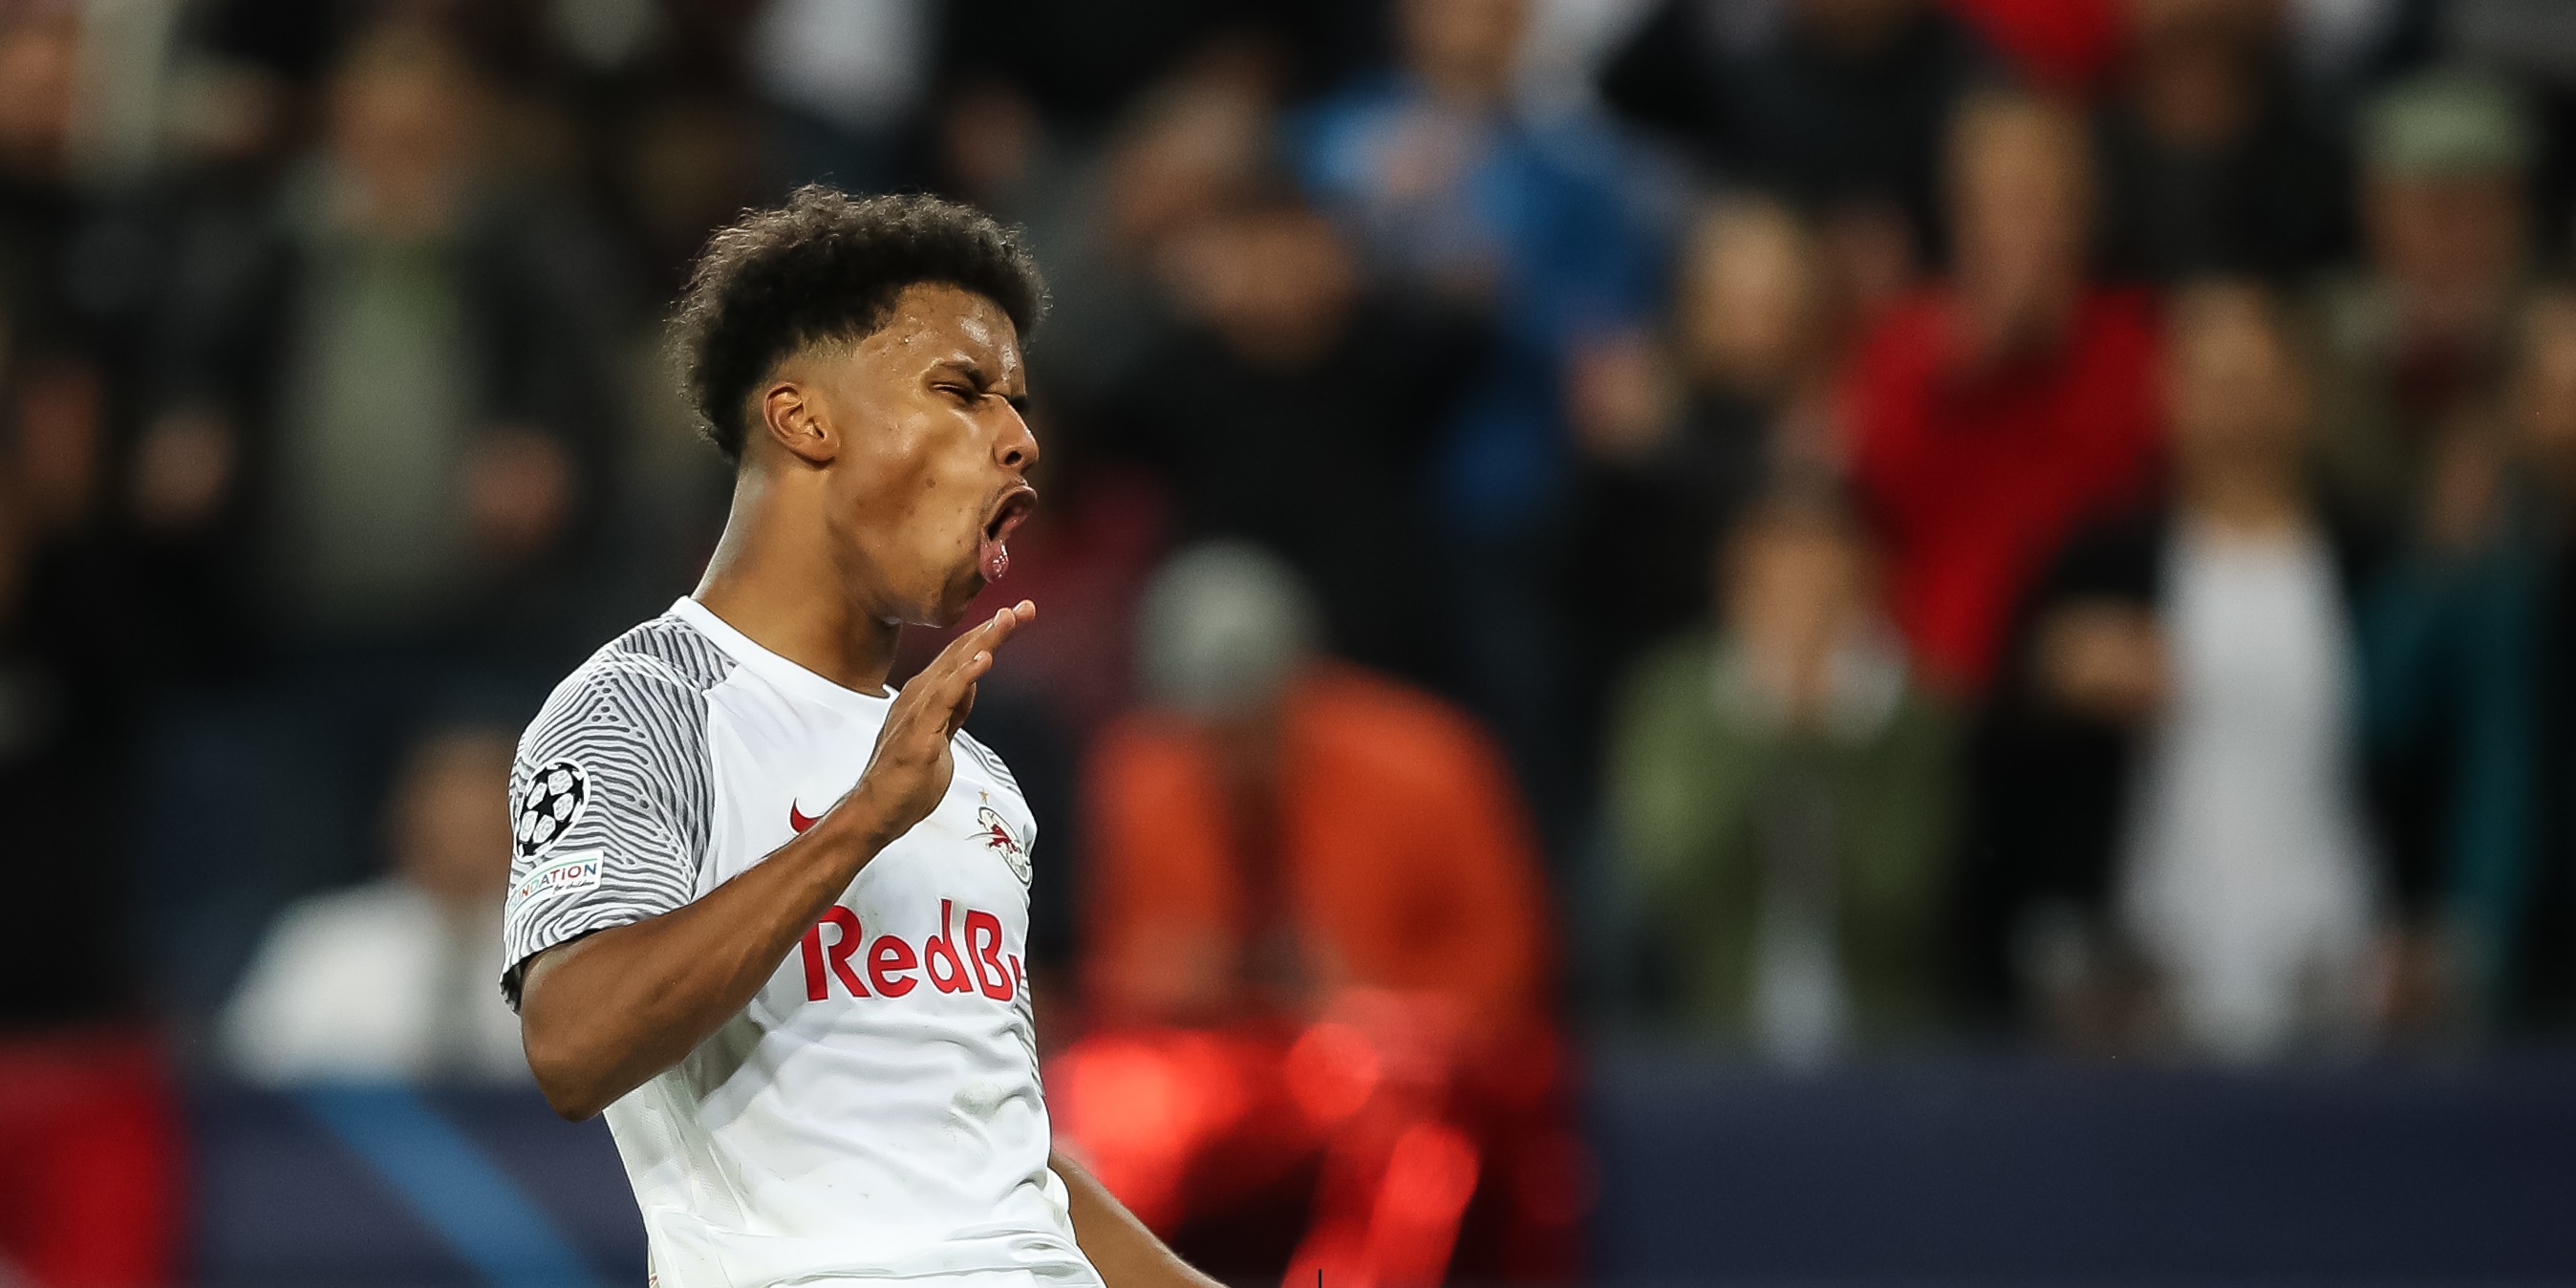 ‘He’ll certainly be one on Liverpool’s radar’ – Neil Jones shares prediction for teenage sensation with 10 goals already this season